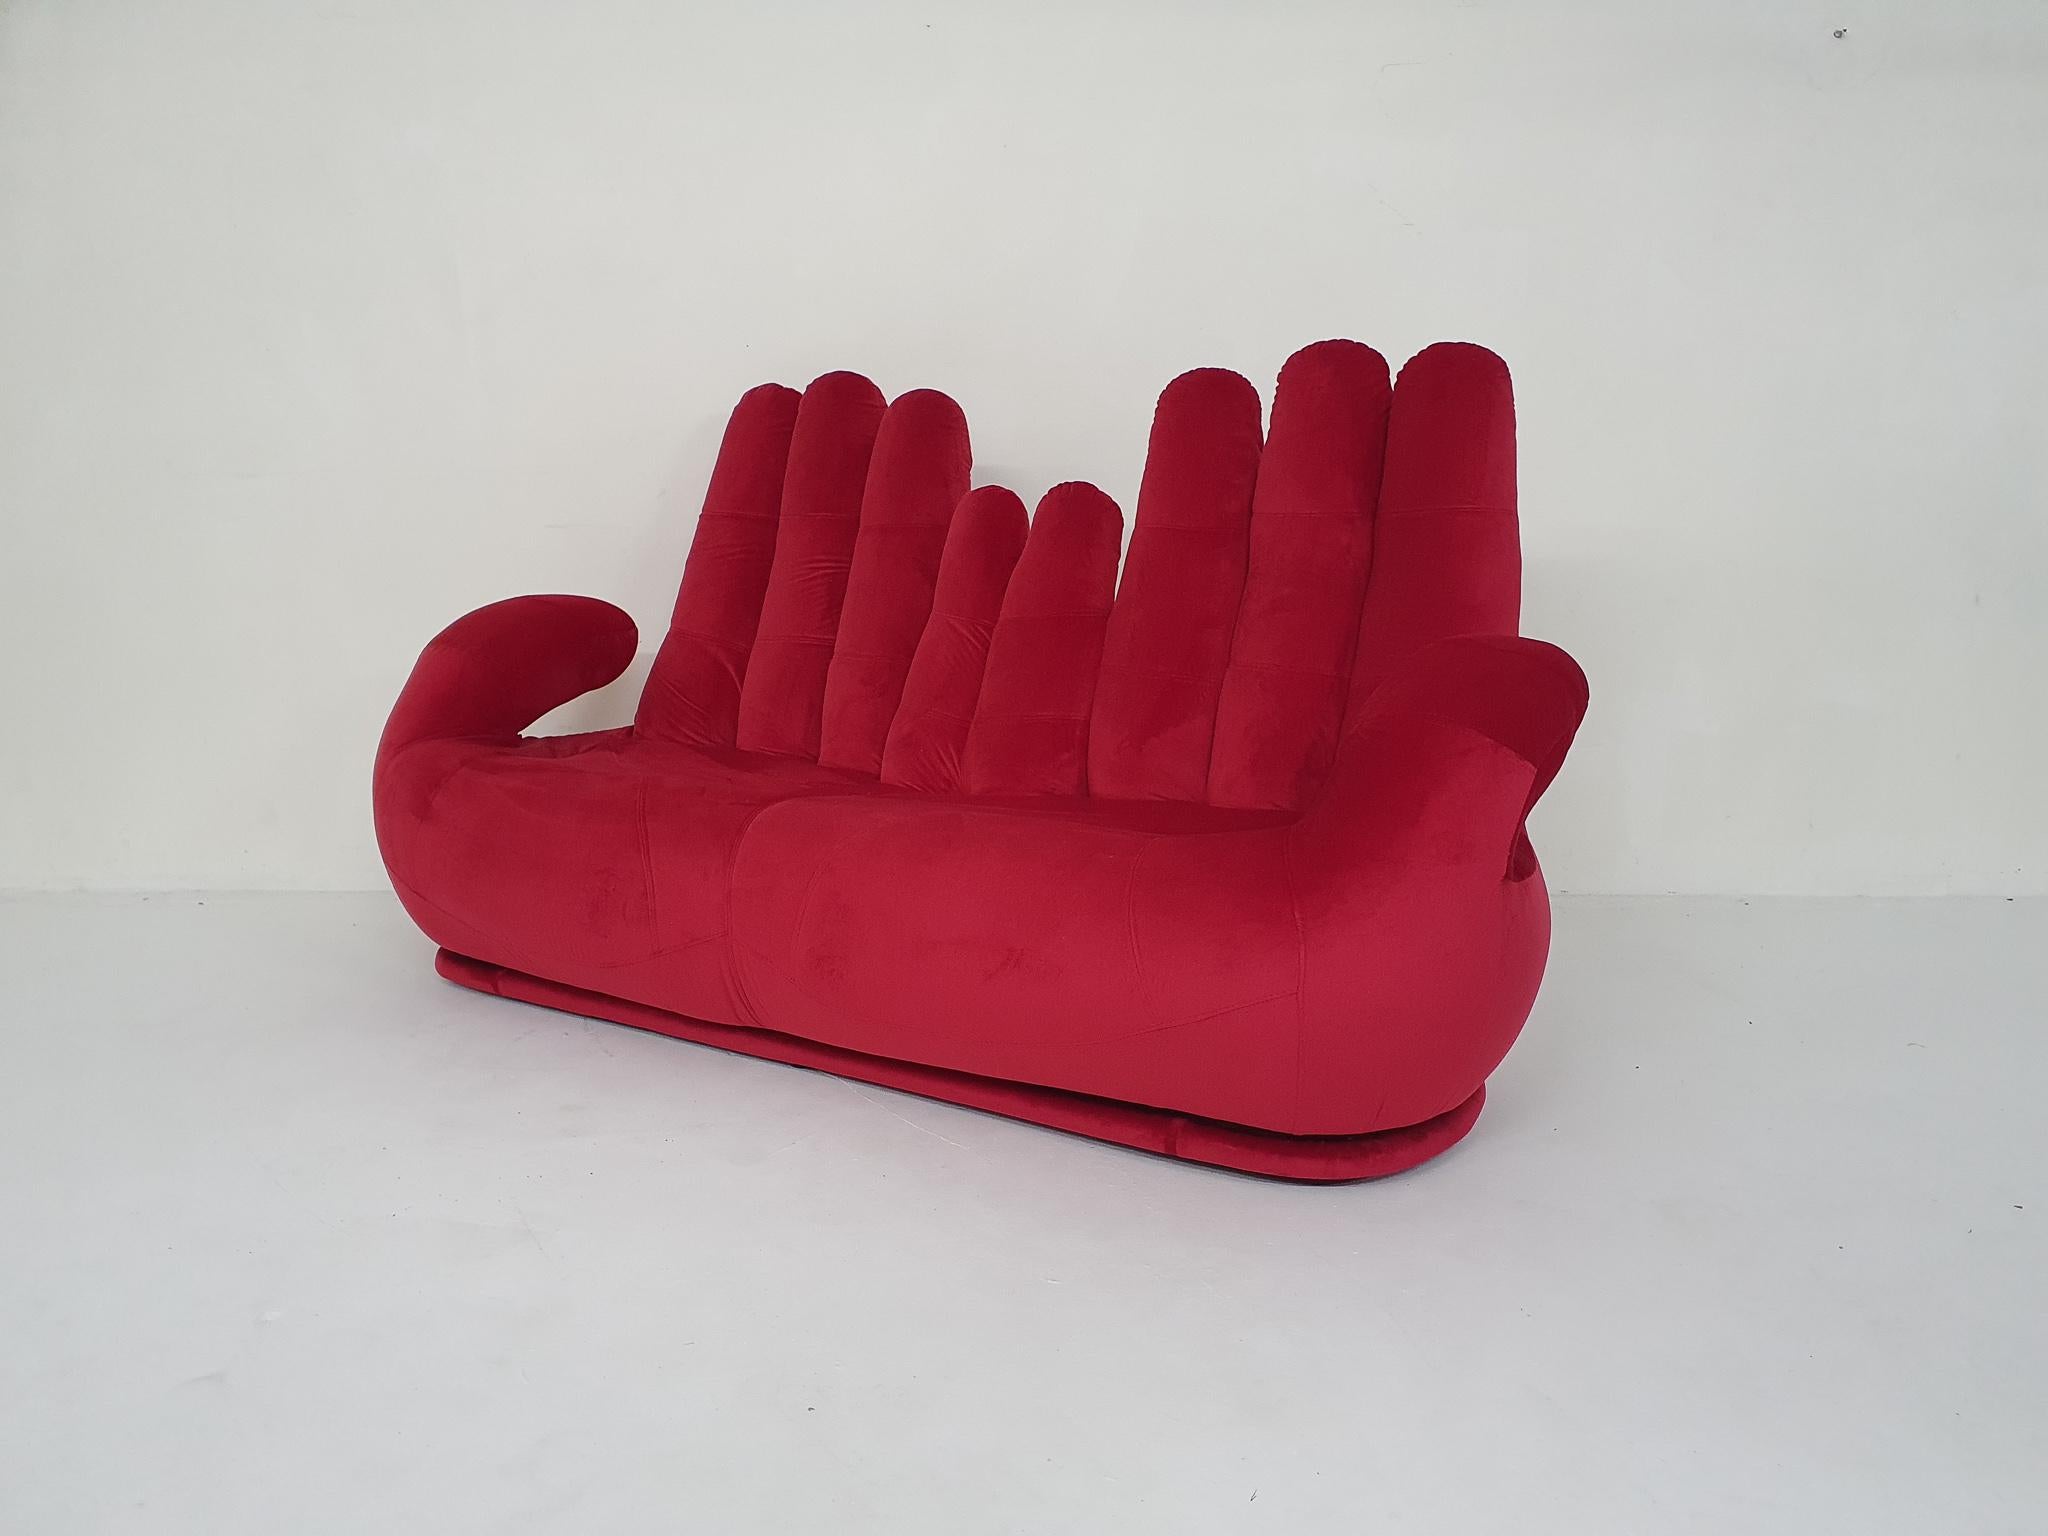 Vintage sofa shaped as two hands, re-upholstered in red velvet.

 